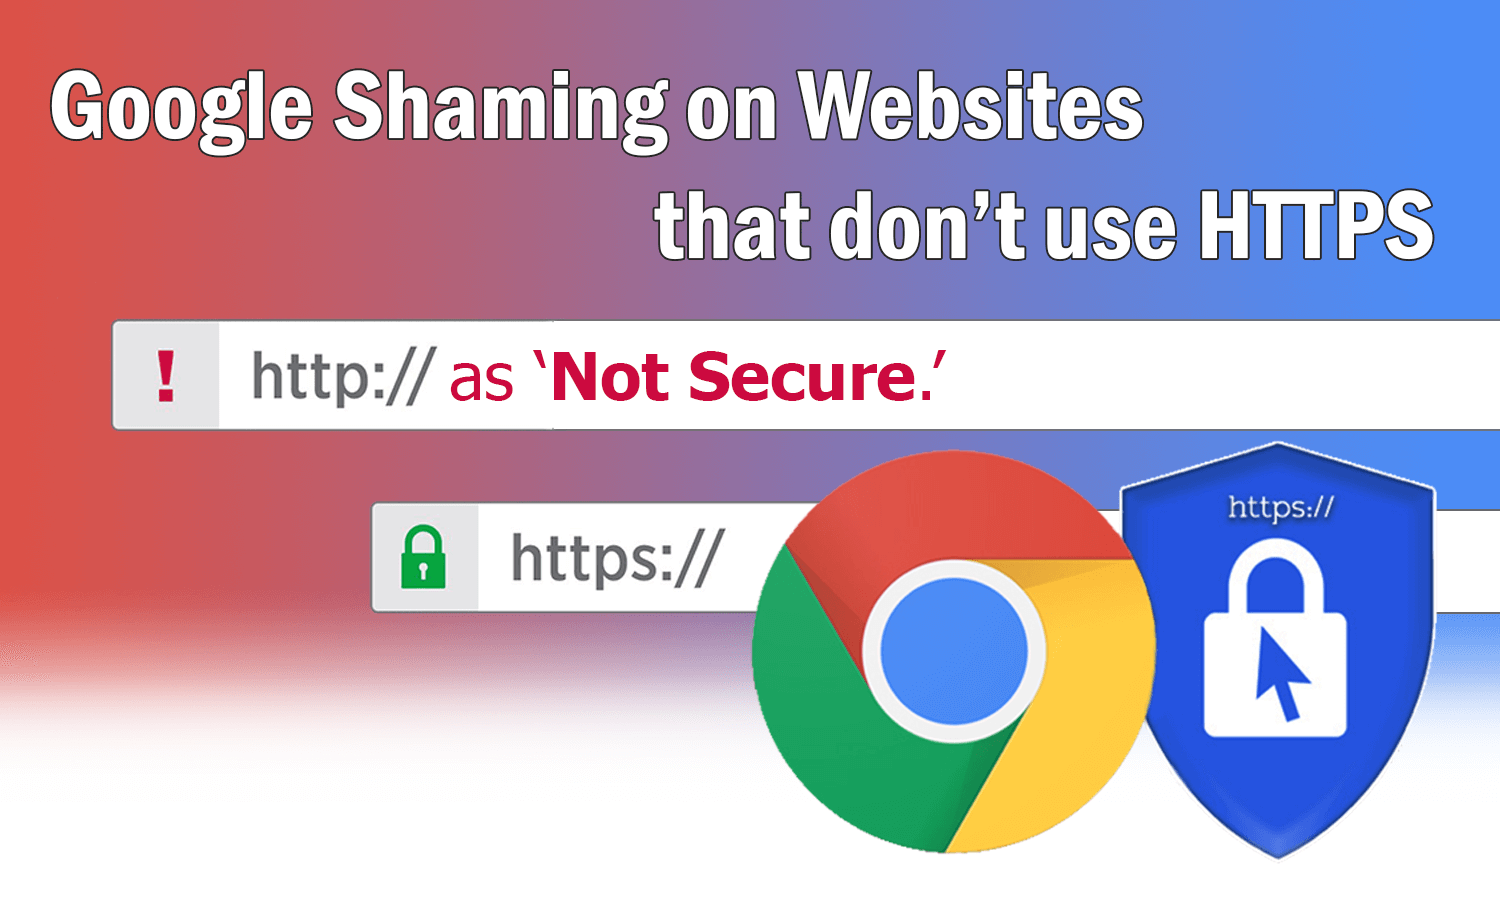 All Sites that don’t use HTTPS, will soon start being shamed on Google as ‘ Not Secure ‘!